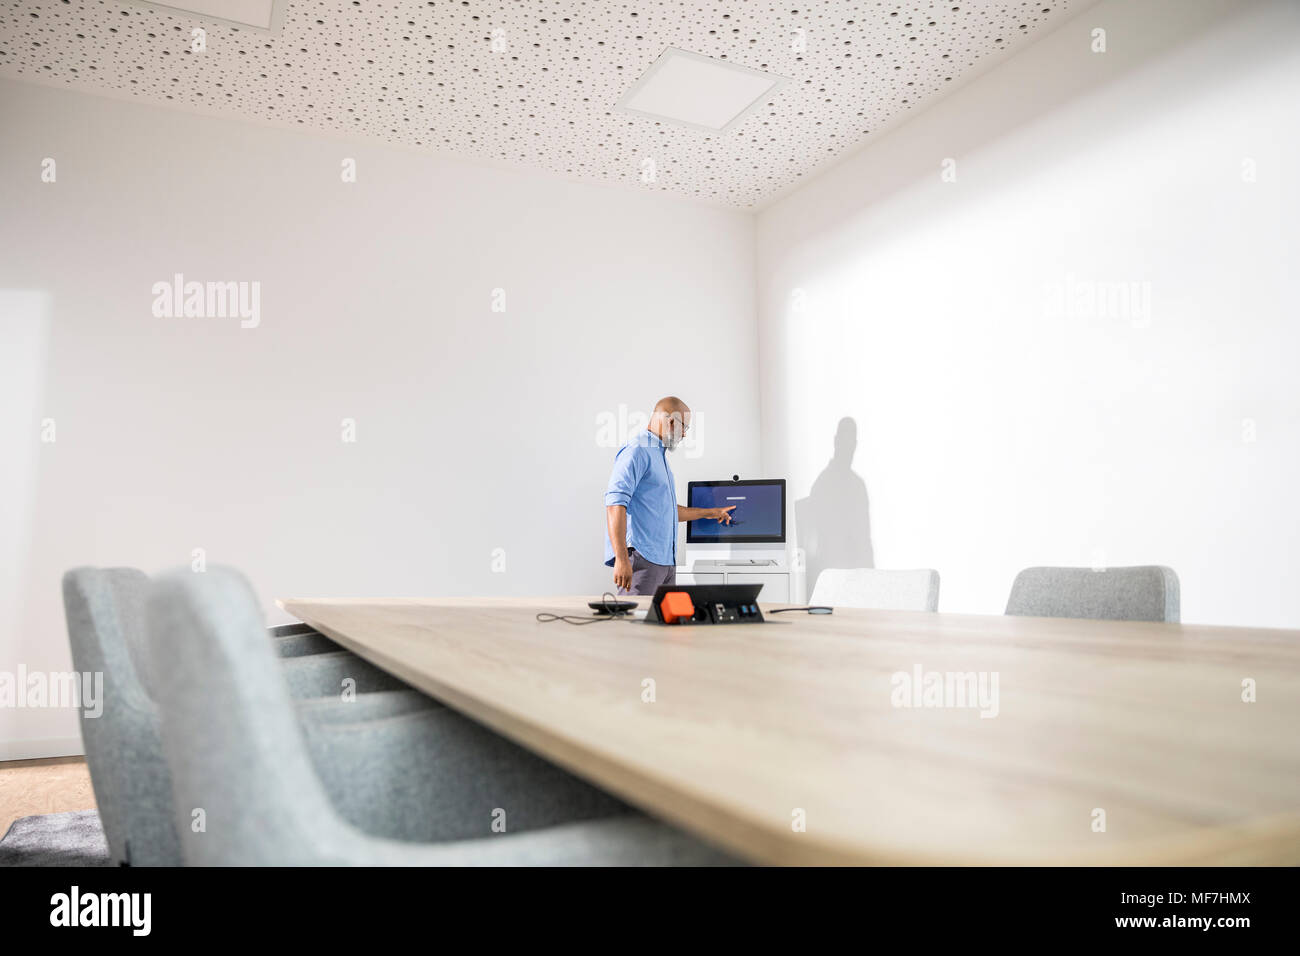 Businessman in conference room preparing a presentation Stock Photo